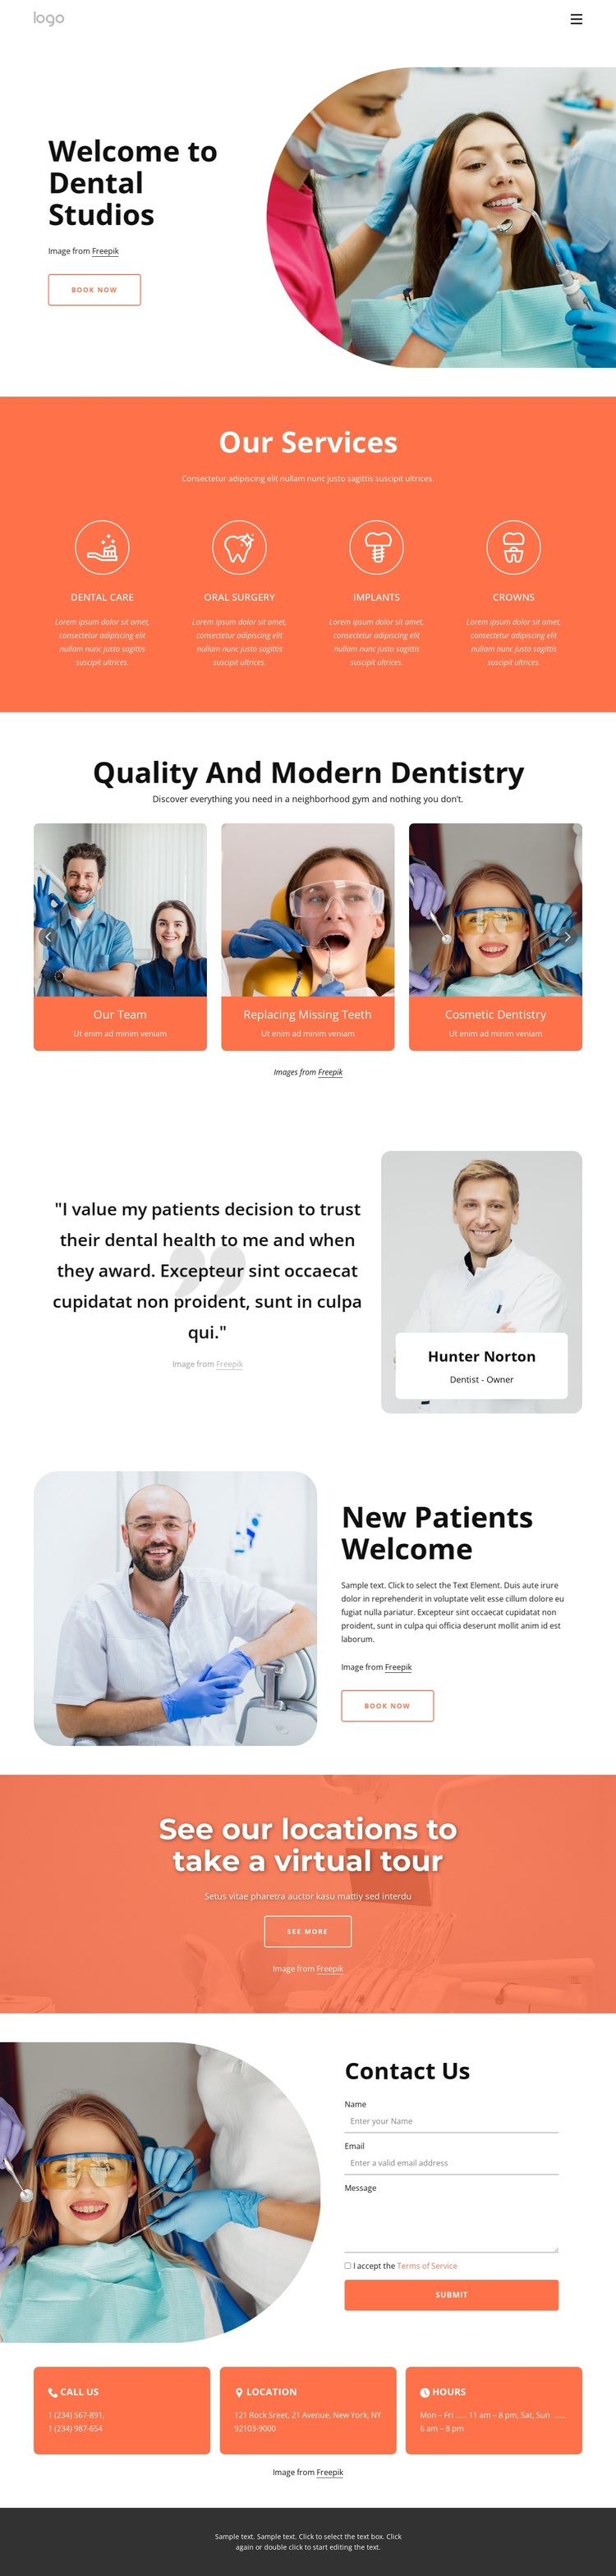 Welcome to dental studios Template